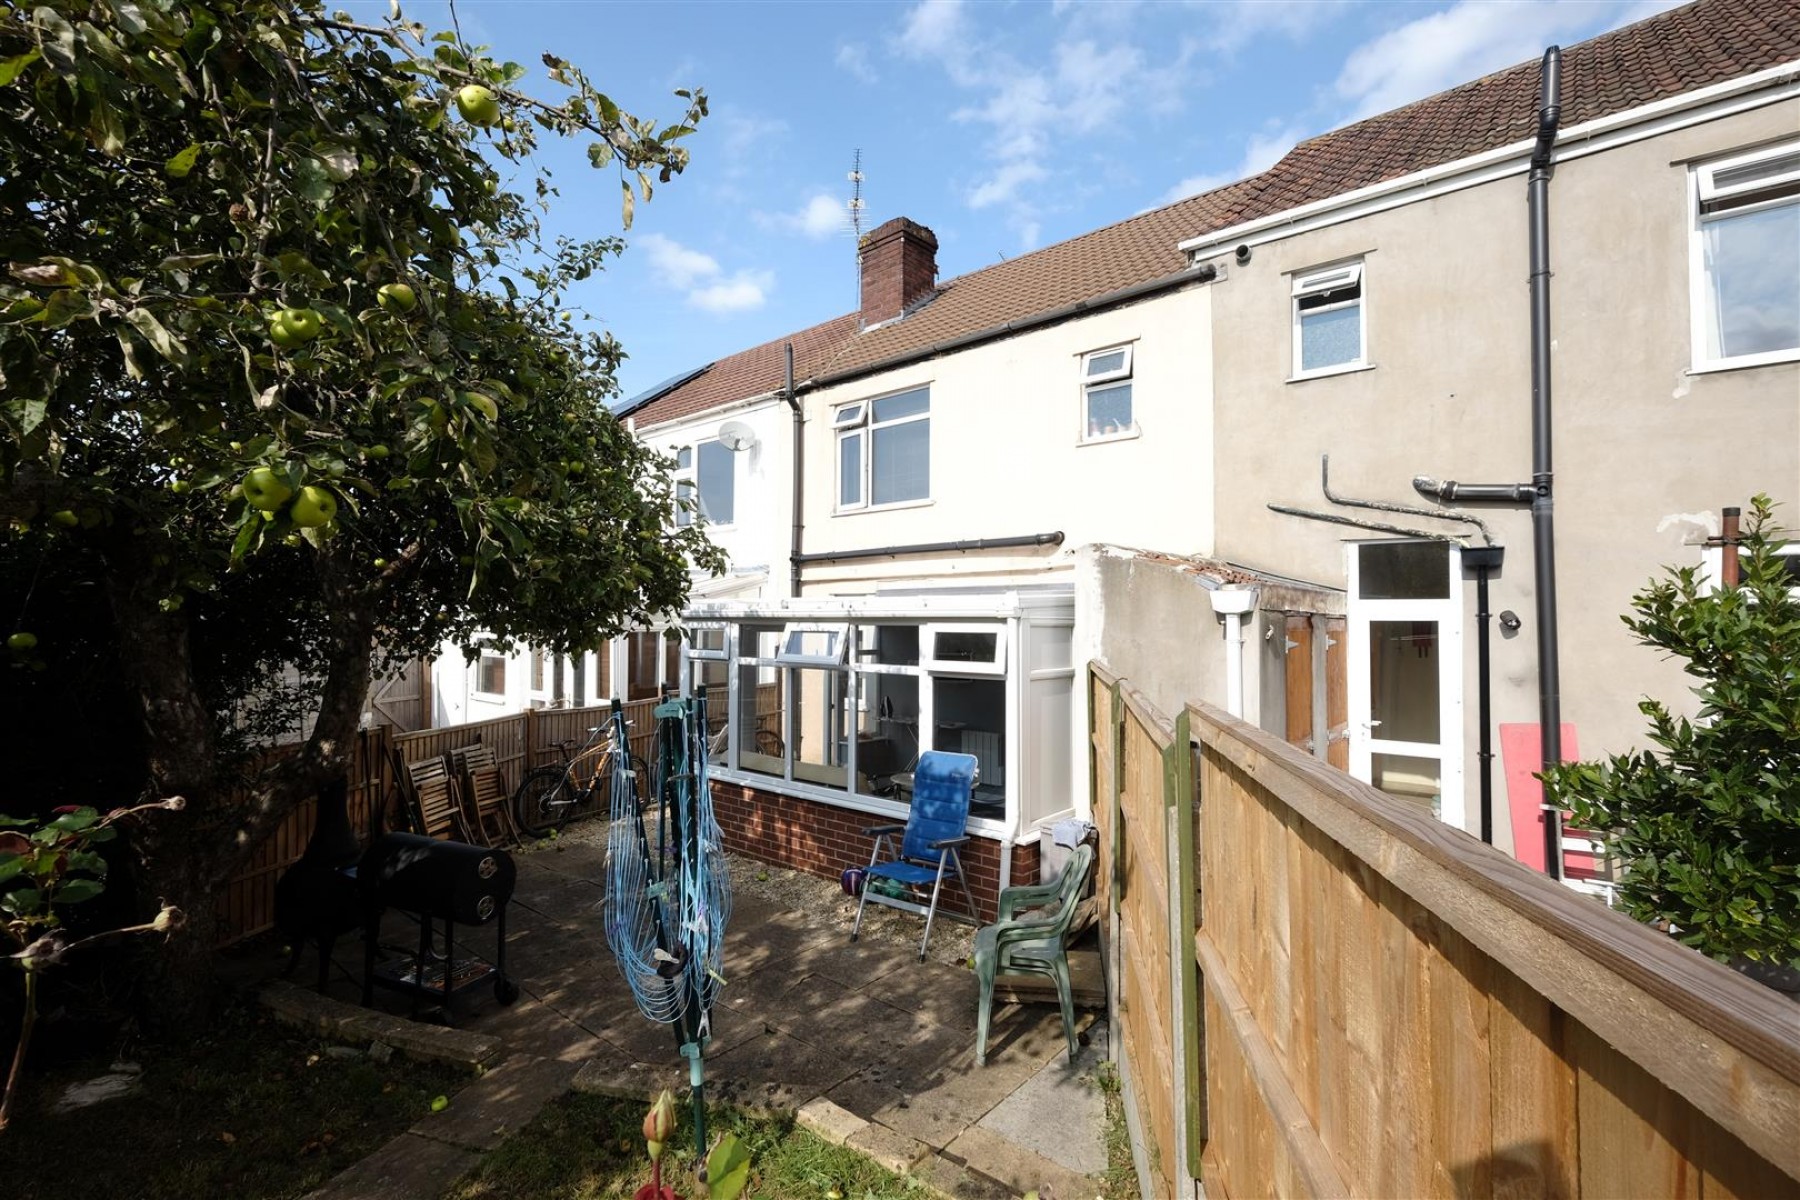 Images for 5 BED / 5 BATH - HMO - £33K PA